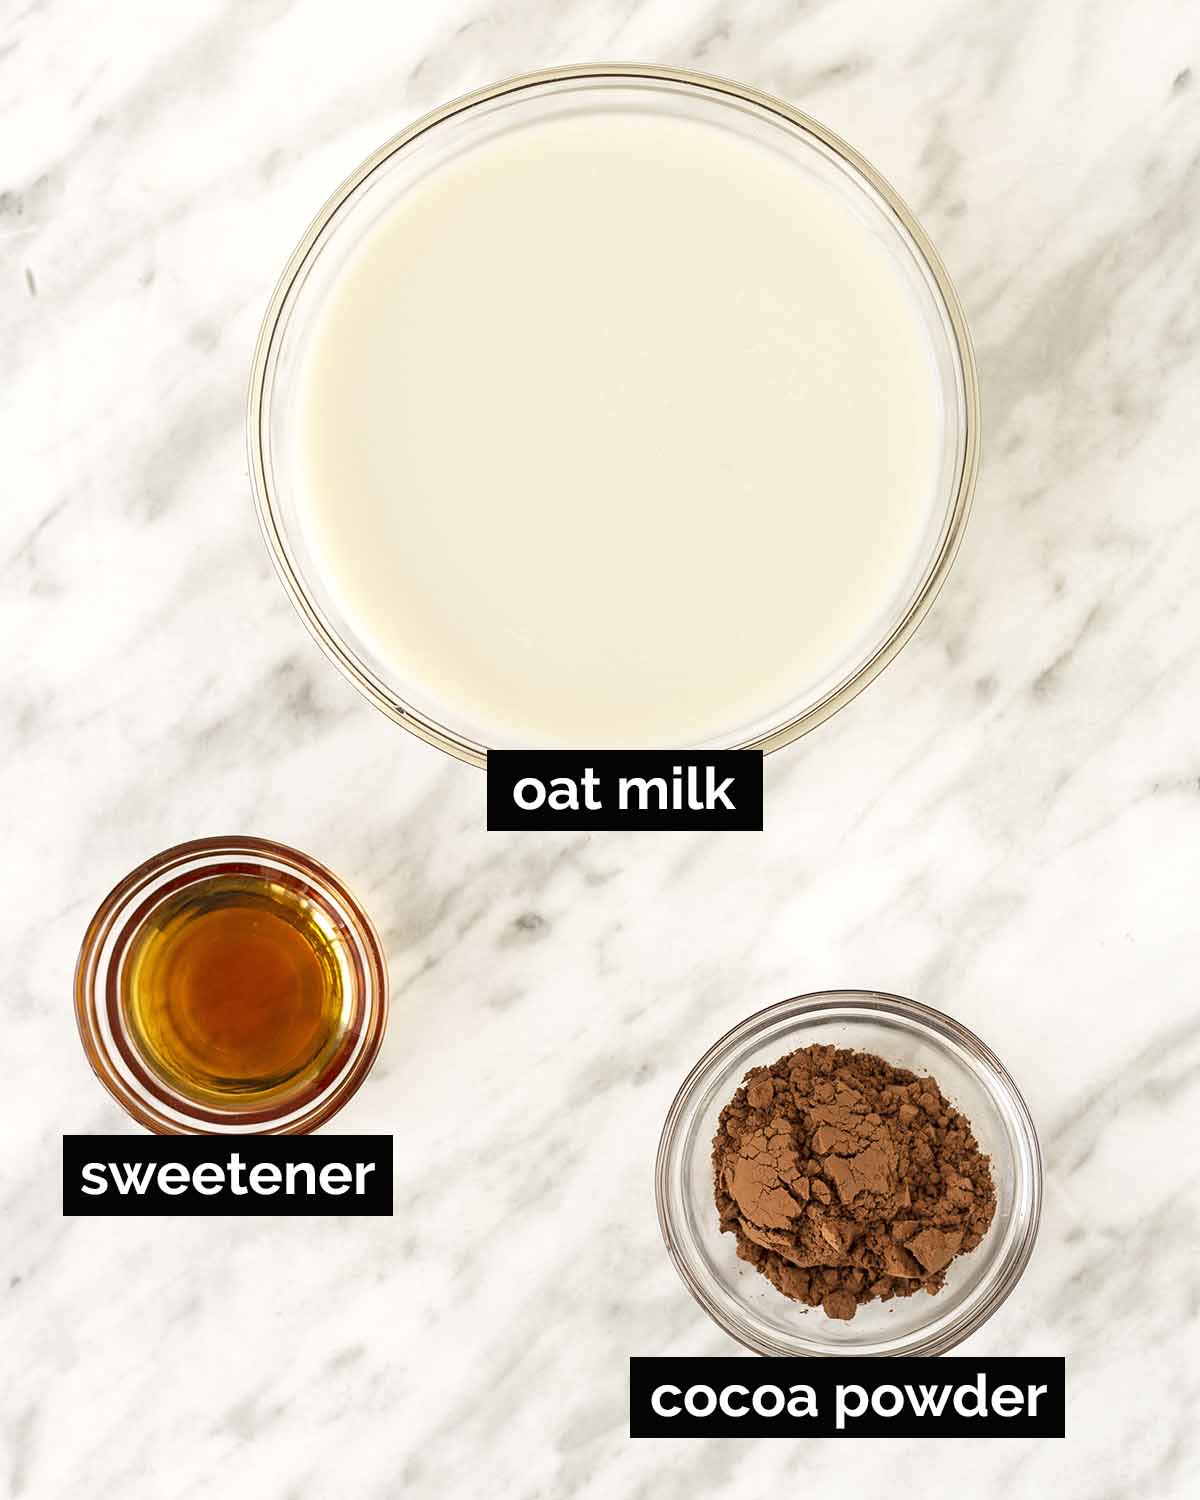 An overhead shot showing the ingredients needed to make hot chocolate with oat milk.